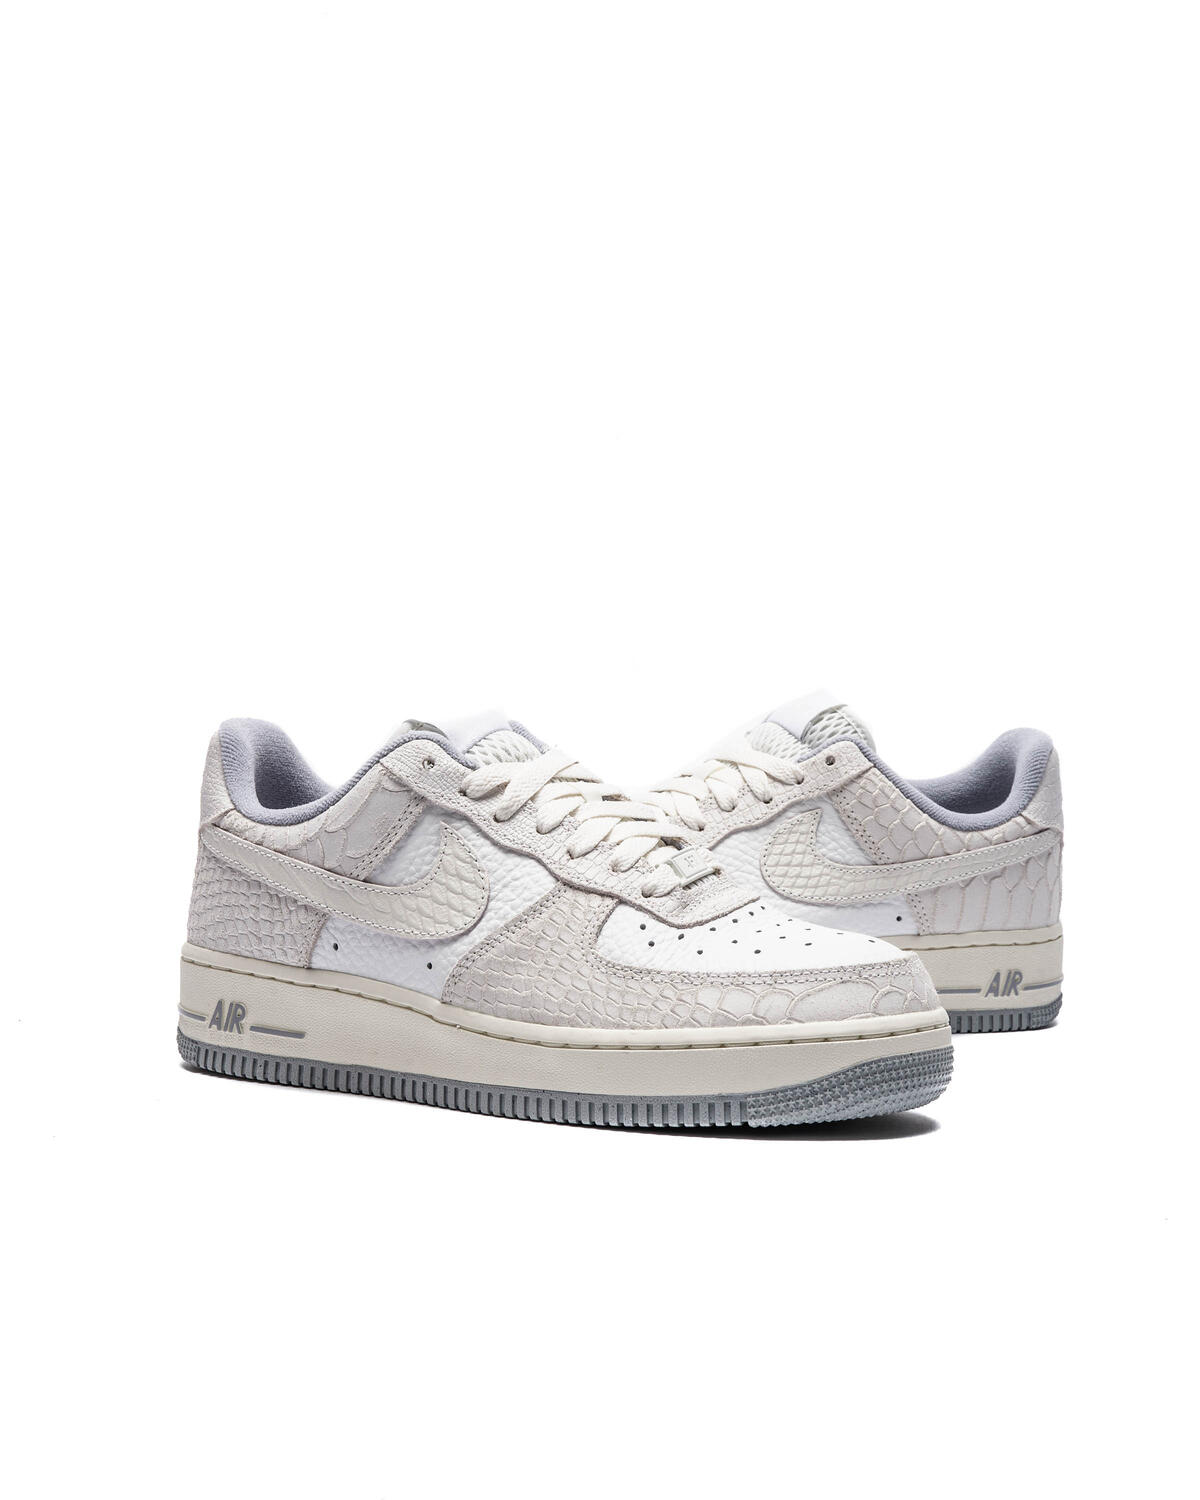 Nike WMNS AIR FORCE 1 '07 | DX2678-100 | AFEW STORE